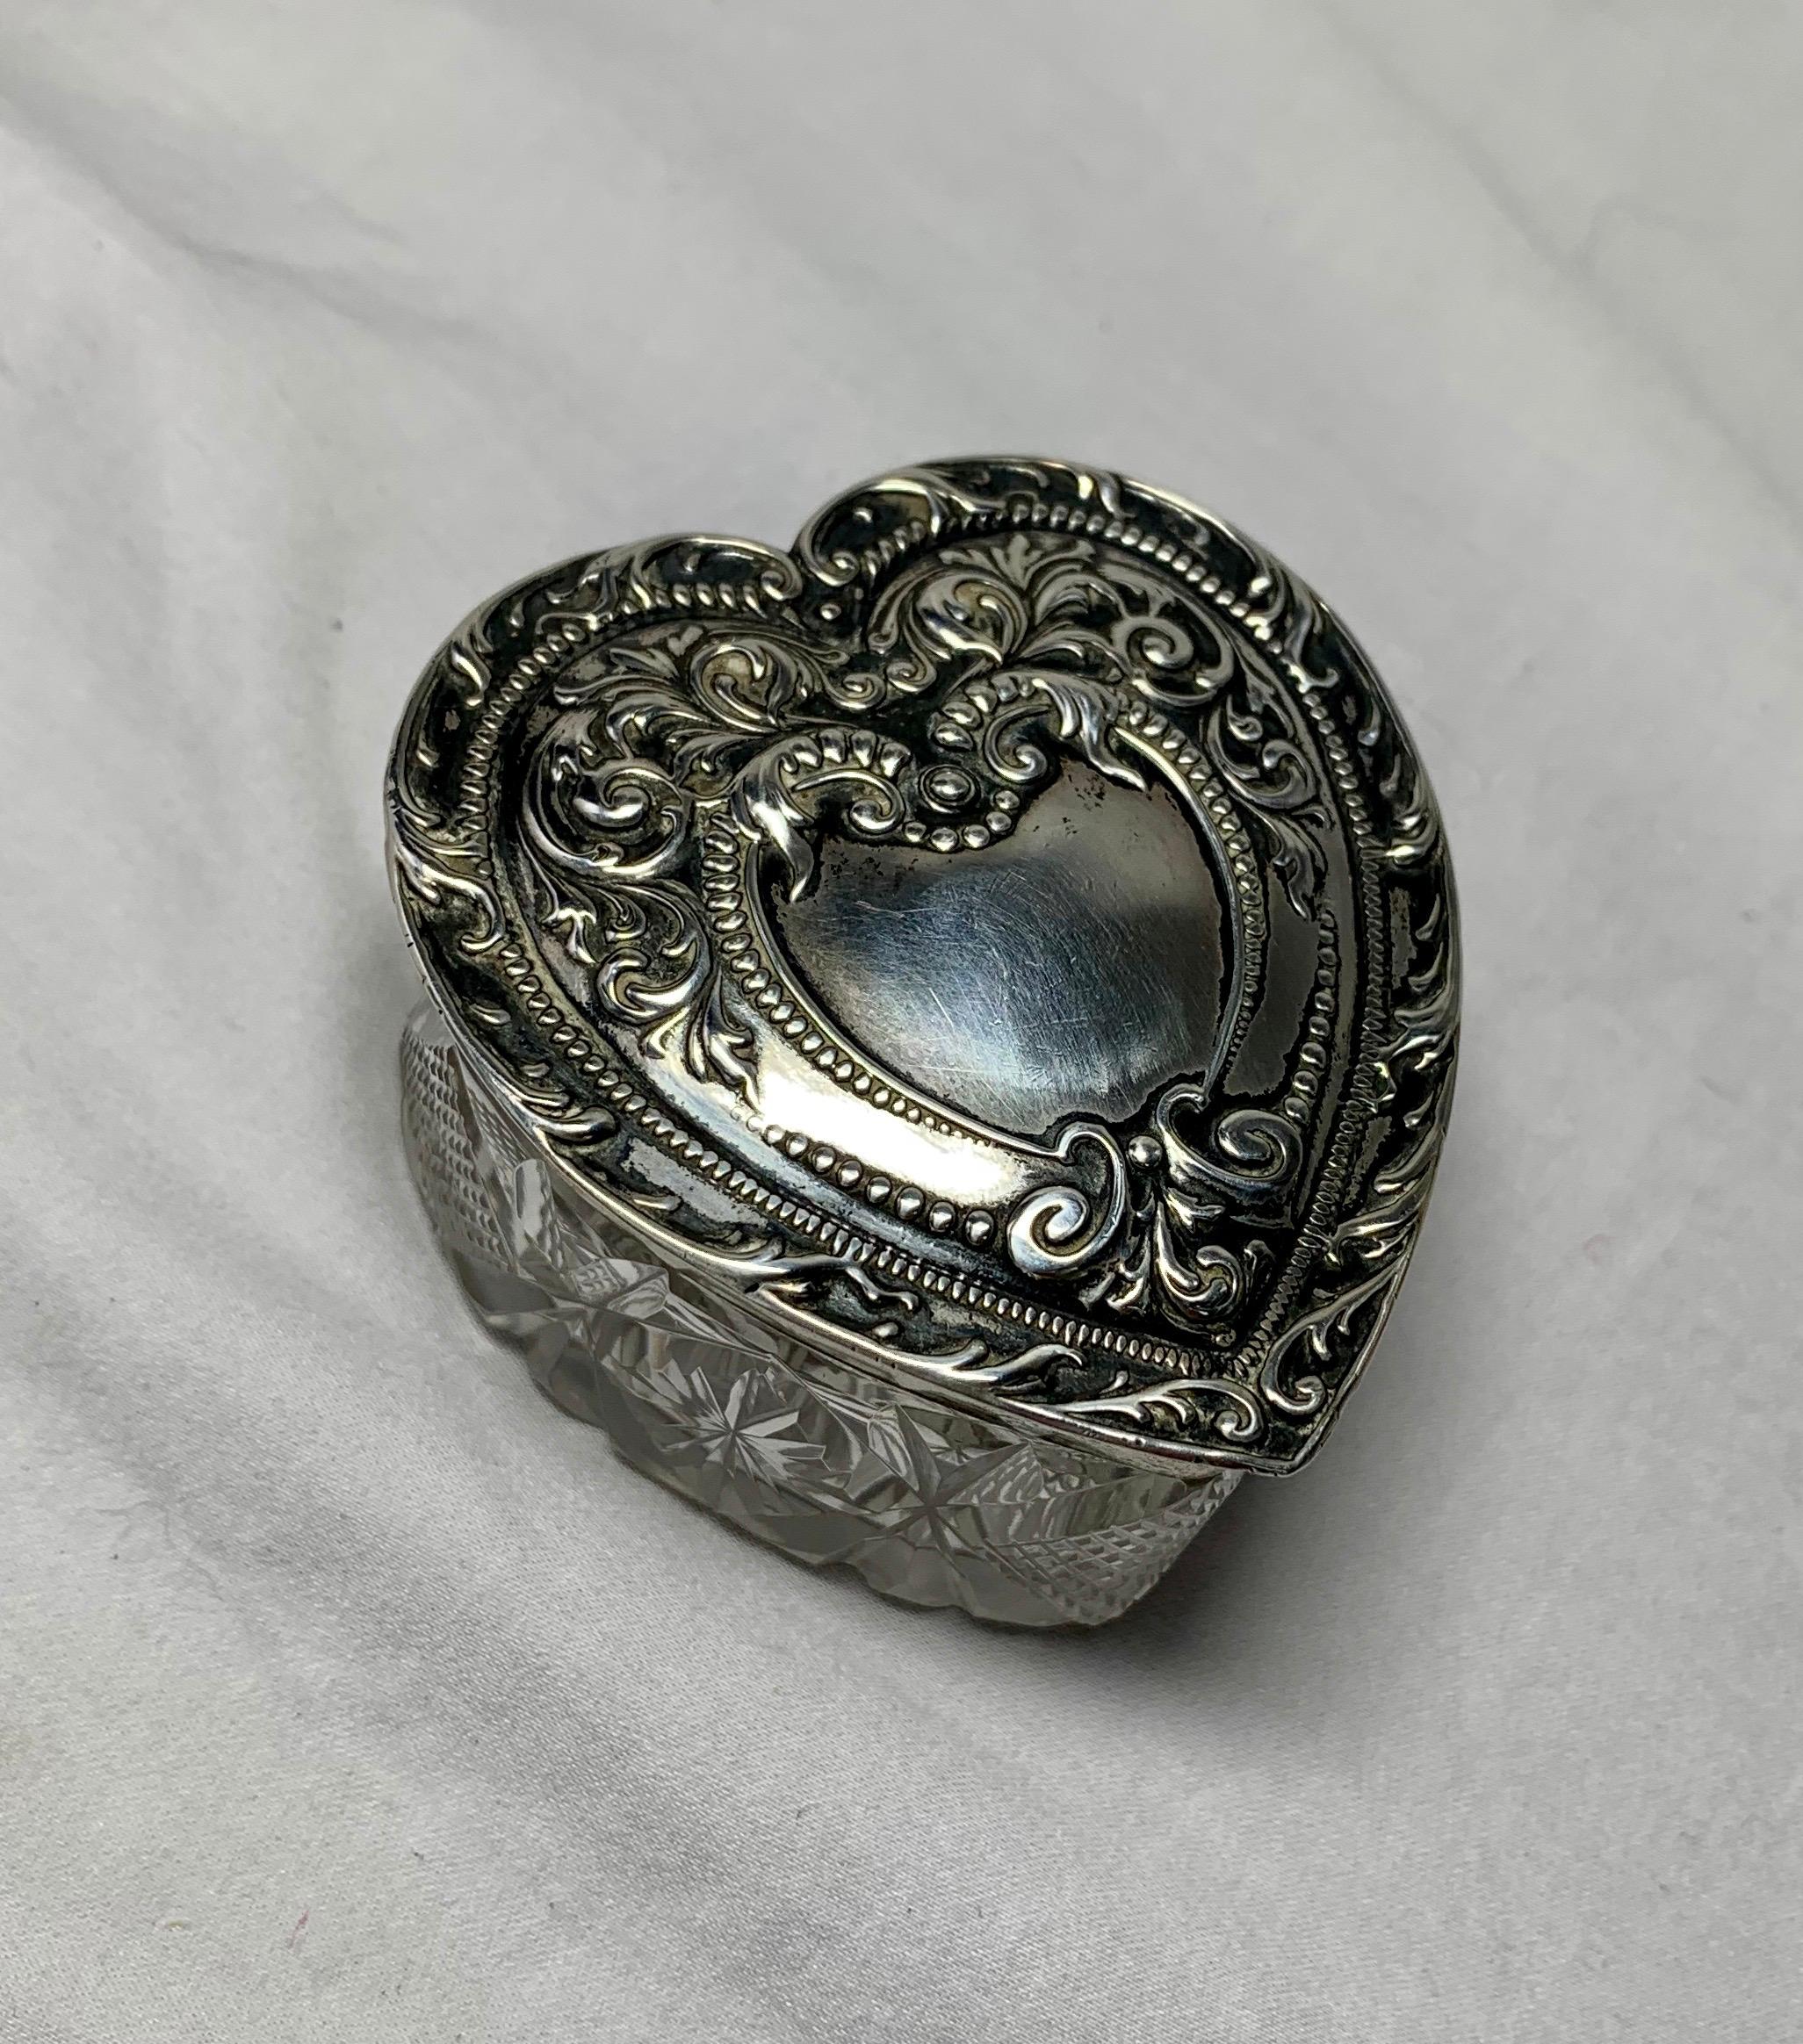 THIS IS A WONDERFUL ANTIQUE VICTORIAN HEART SHAPE BOX WITH A STERLING SILVER REPOUSSE ENGRAVED TOP OF EXTRAORDINARY BEAUTY WITH A CRYSTAL BOTTOM.   THE SILVER JEWELRY, KEEPSAKE, DRESSER, PATCH BOX HAS AN ACANTHUS SCROLL MOTIF REPOUSSE DESIGN WITH